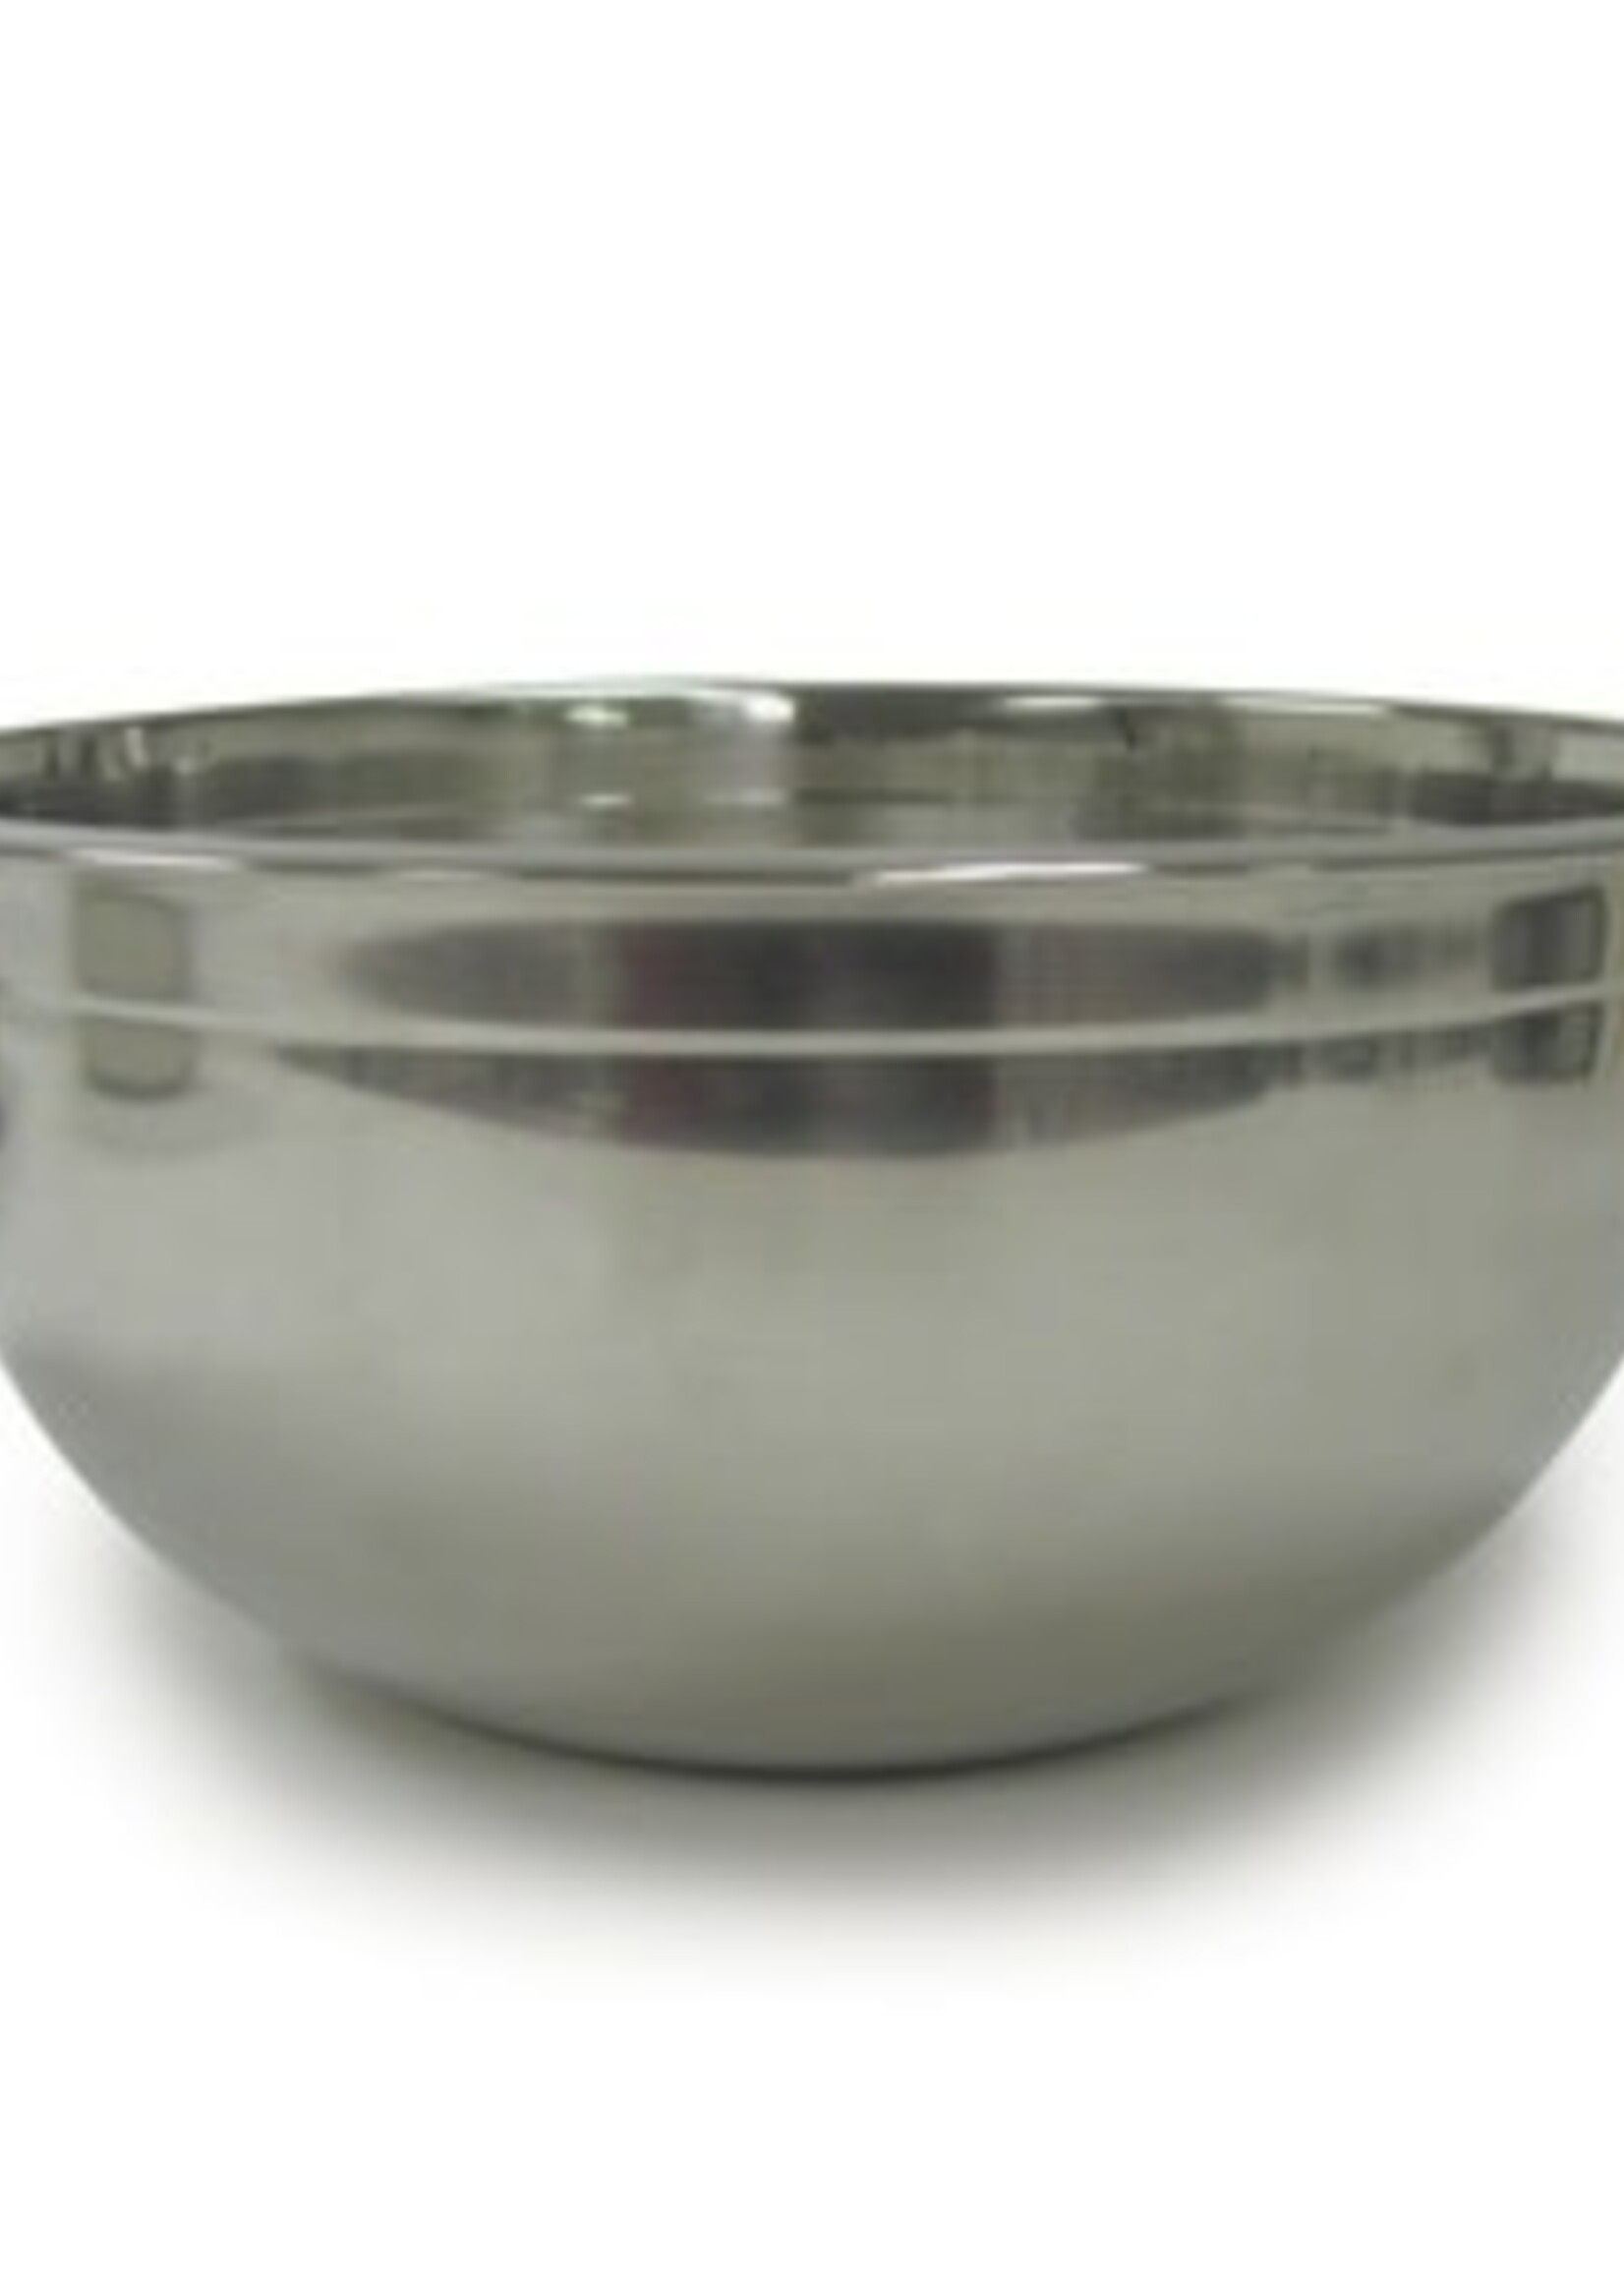 Norpro 8 Qt. Stainless Bowl